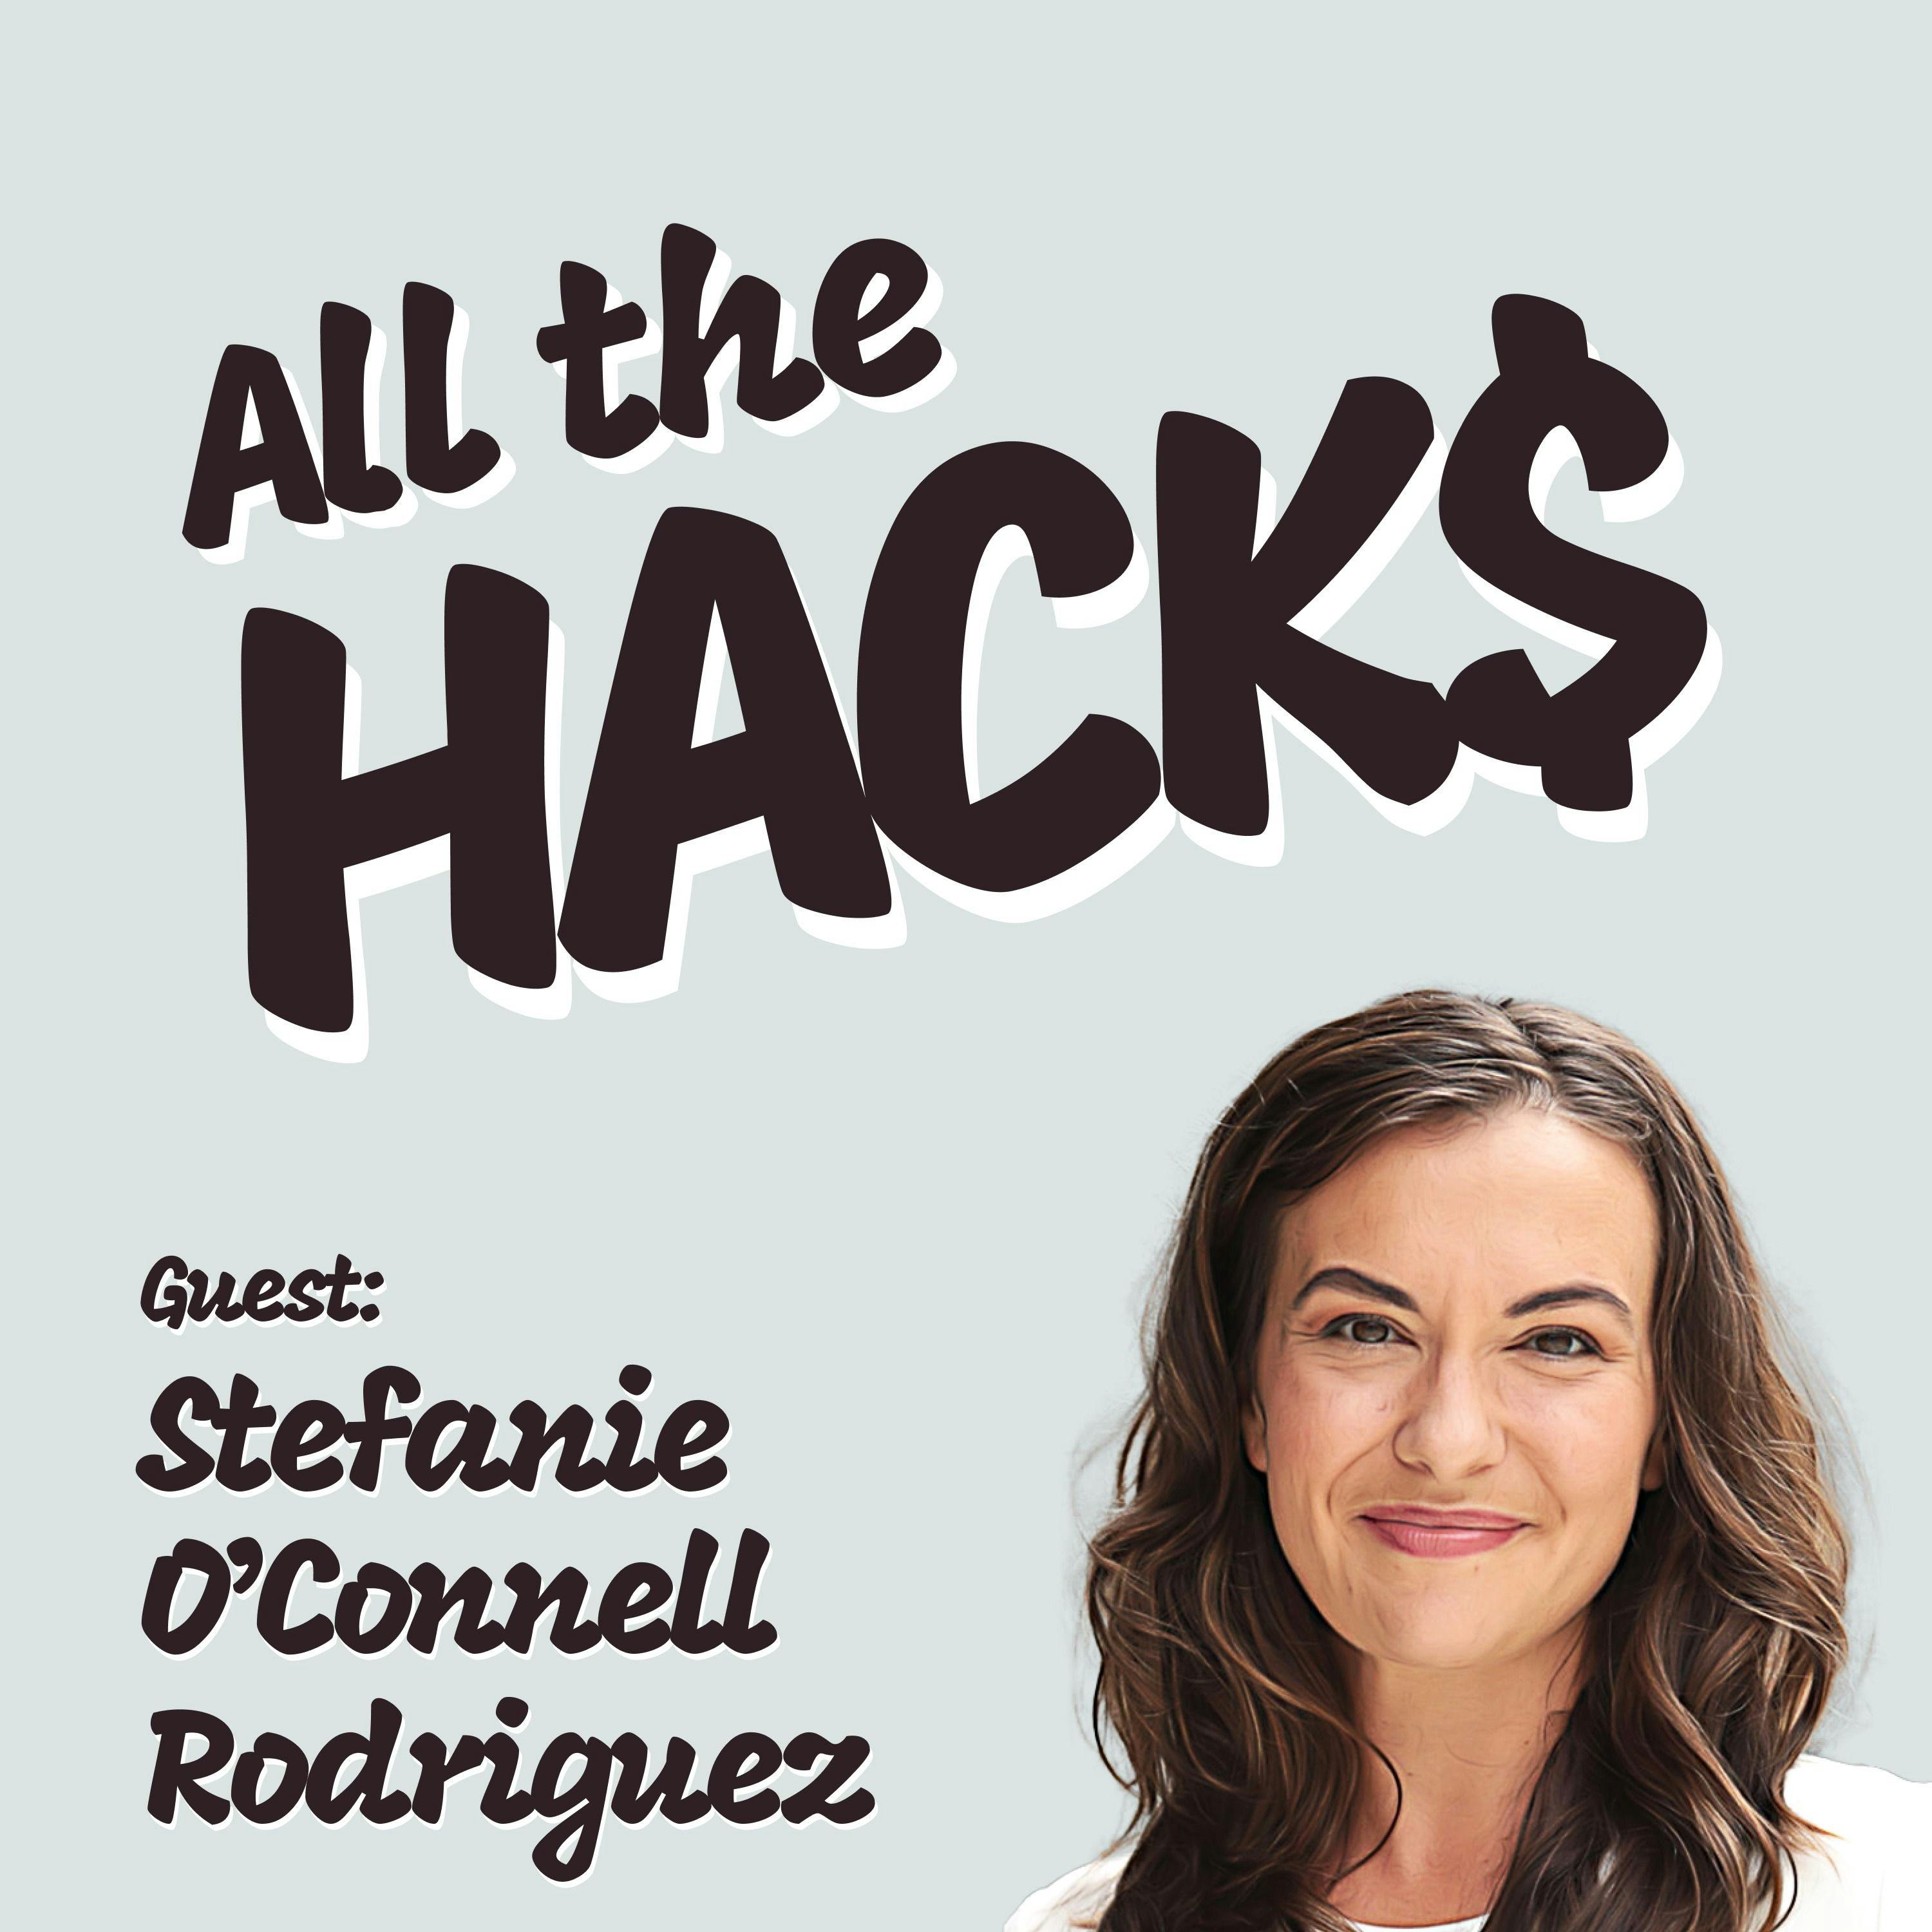 City Hacks, Holiday Gifting and More with Stefanie O’Connell Rodriguez